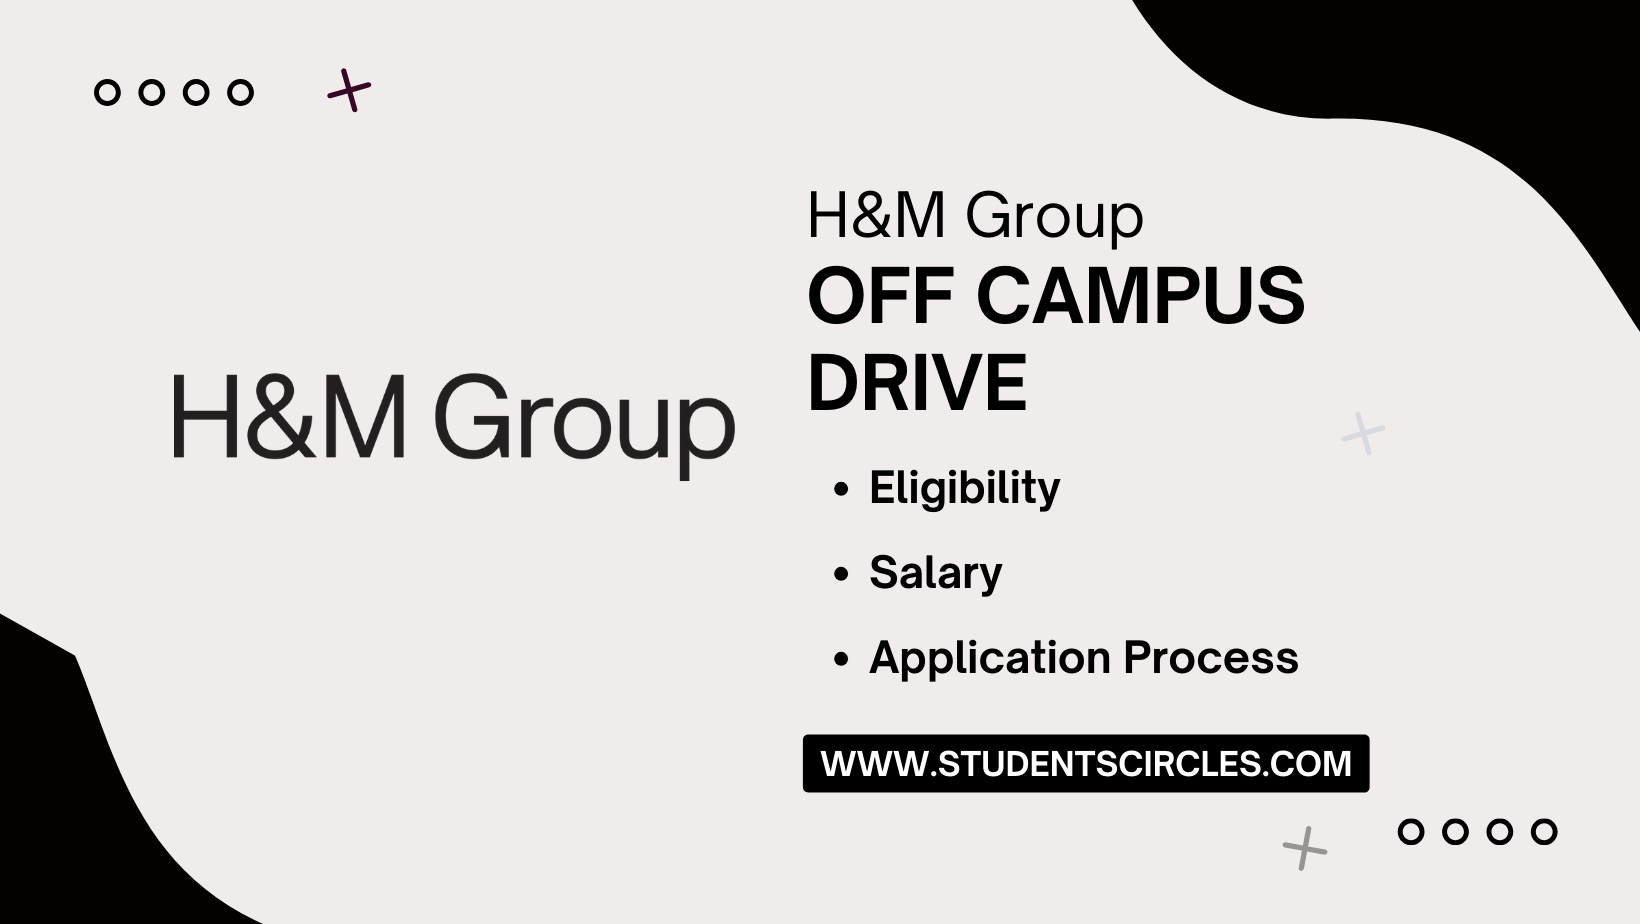 H&M Group Off Campus Drive